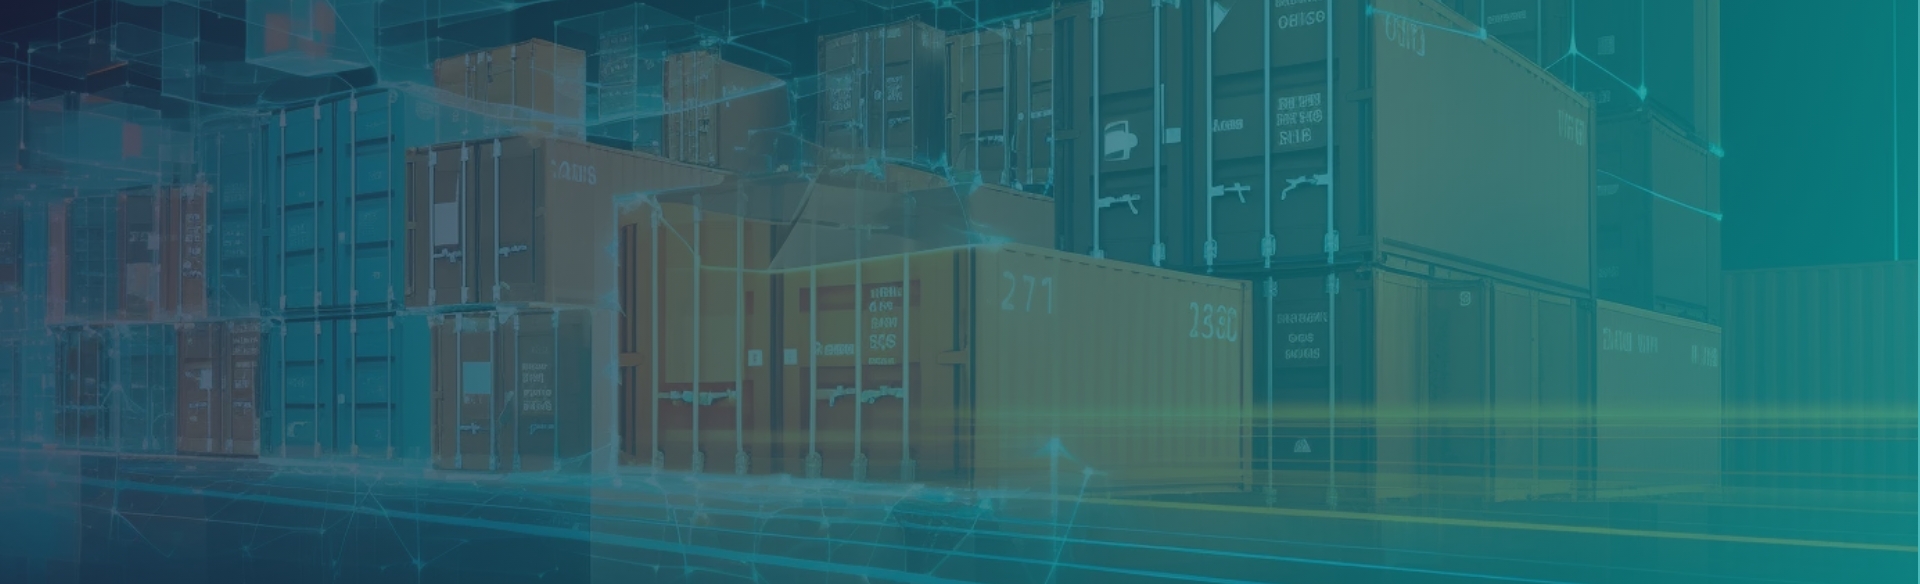 Commerce & Logistics digital interface with stacked shipping containers